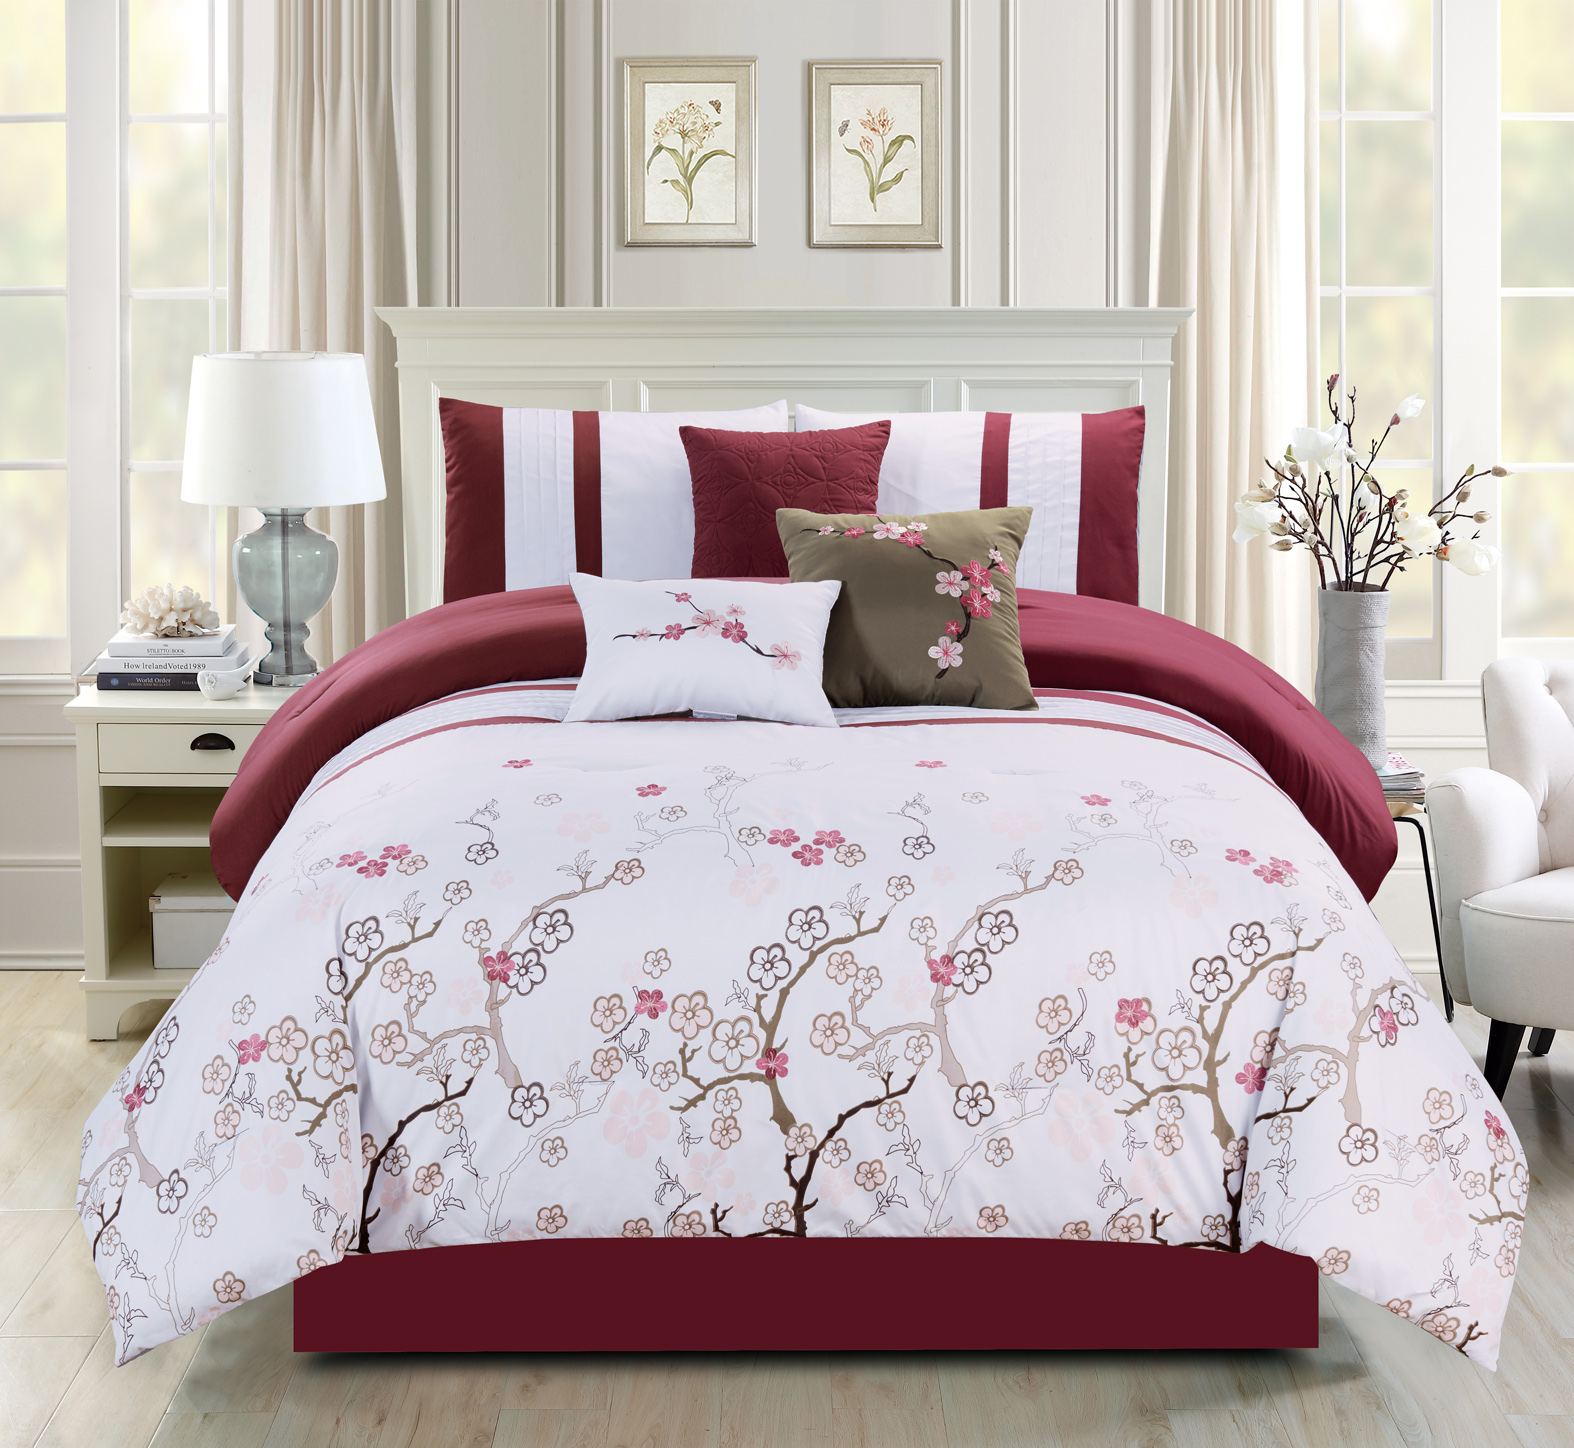 21160q 7 Piece Justin Embroidery Comforter Set, Queen